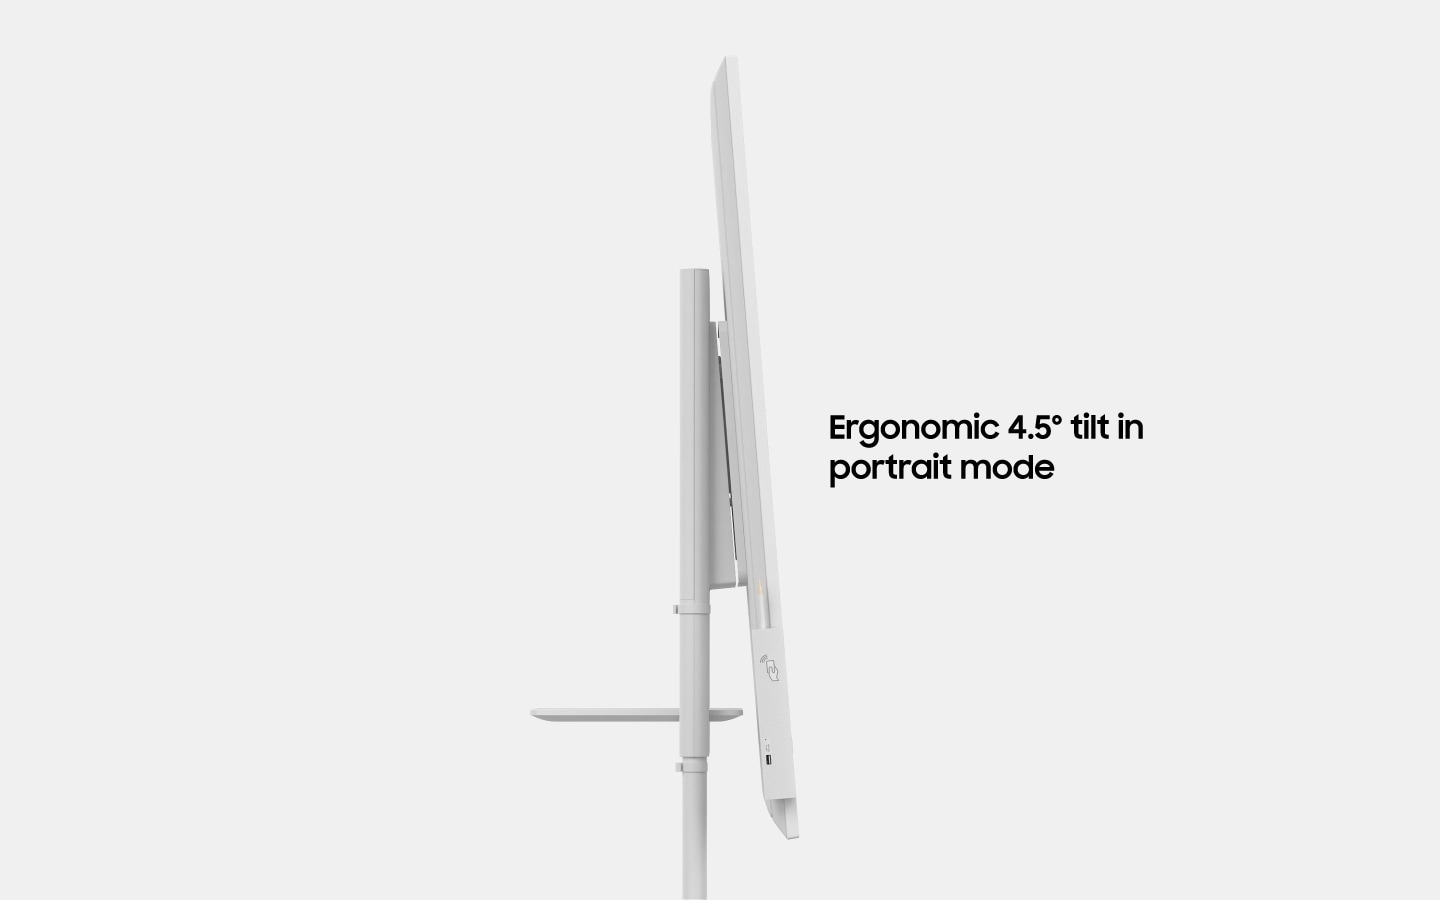 An image showing the side of a Samsung Flip device with text that reads "Ergonomic 4.5ยฐ tilt in portrait mode" (6-1).